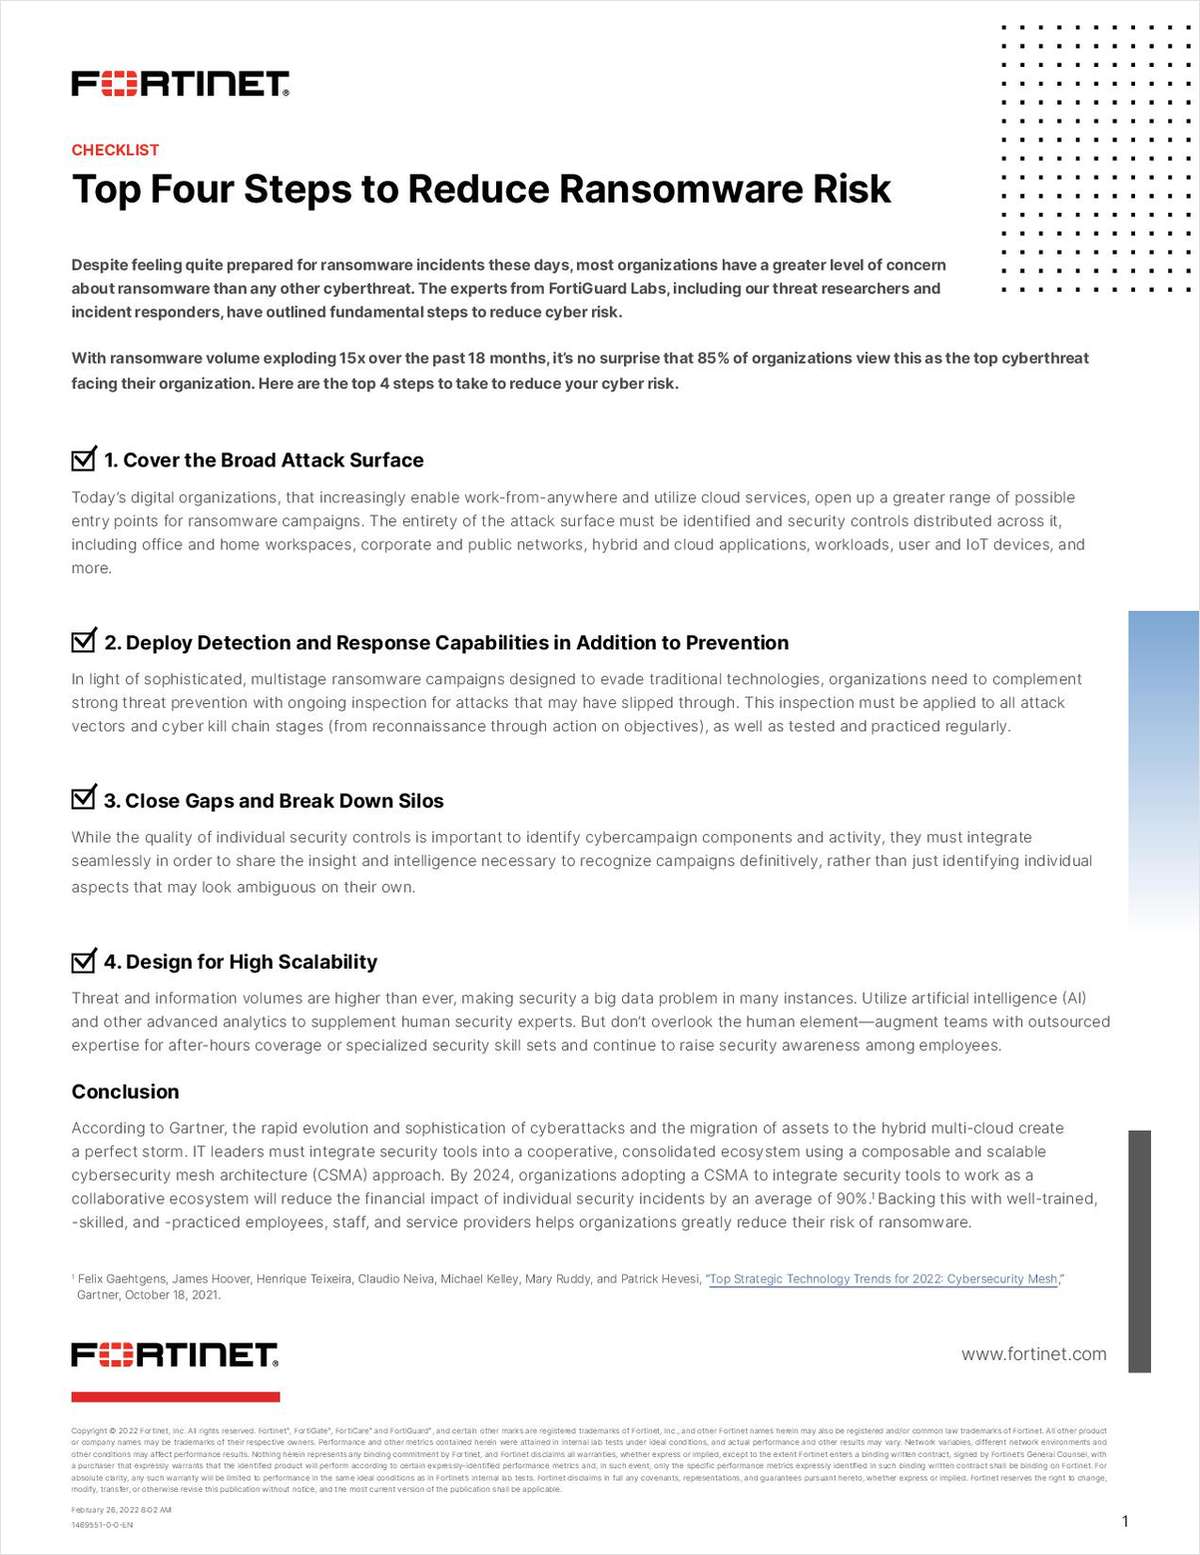 Top Four Steps to Reduce Ransomware Risk